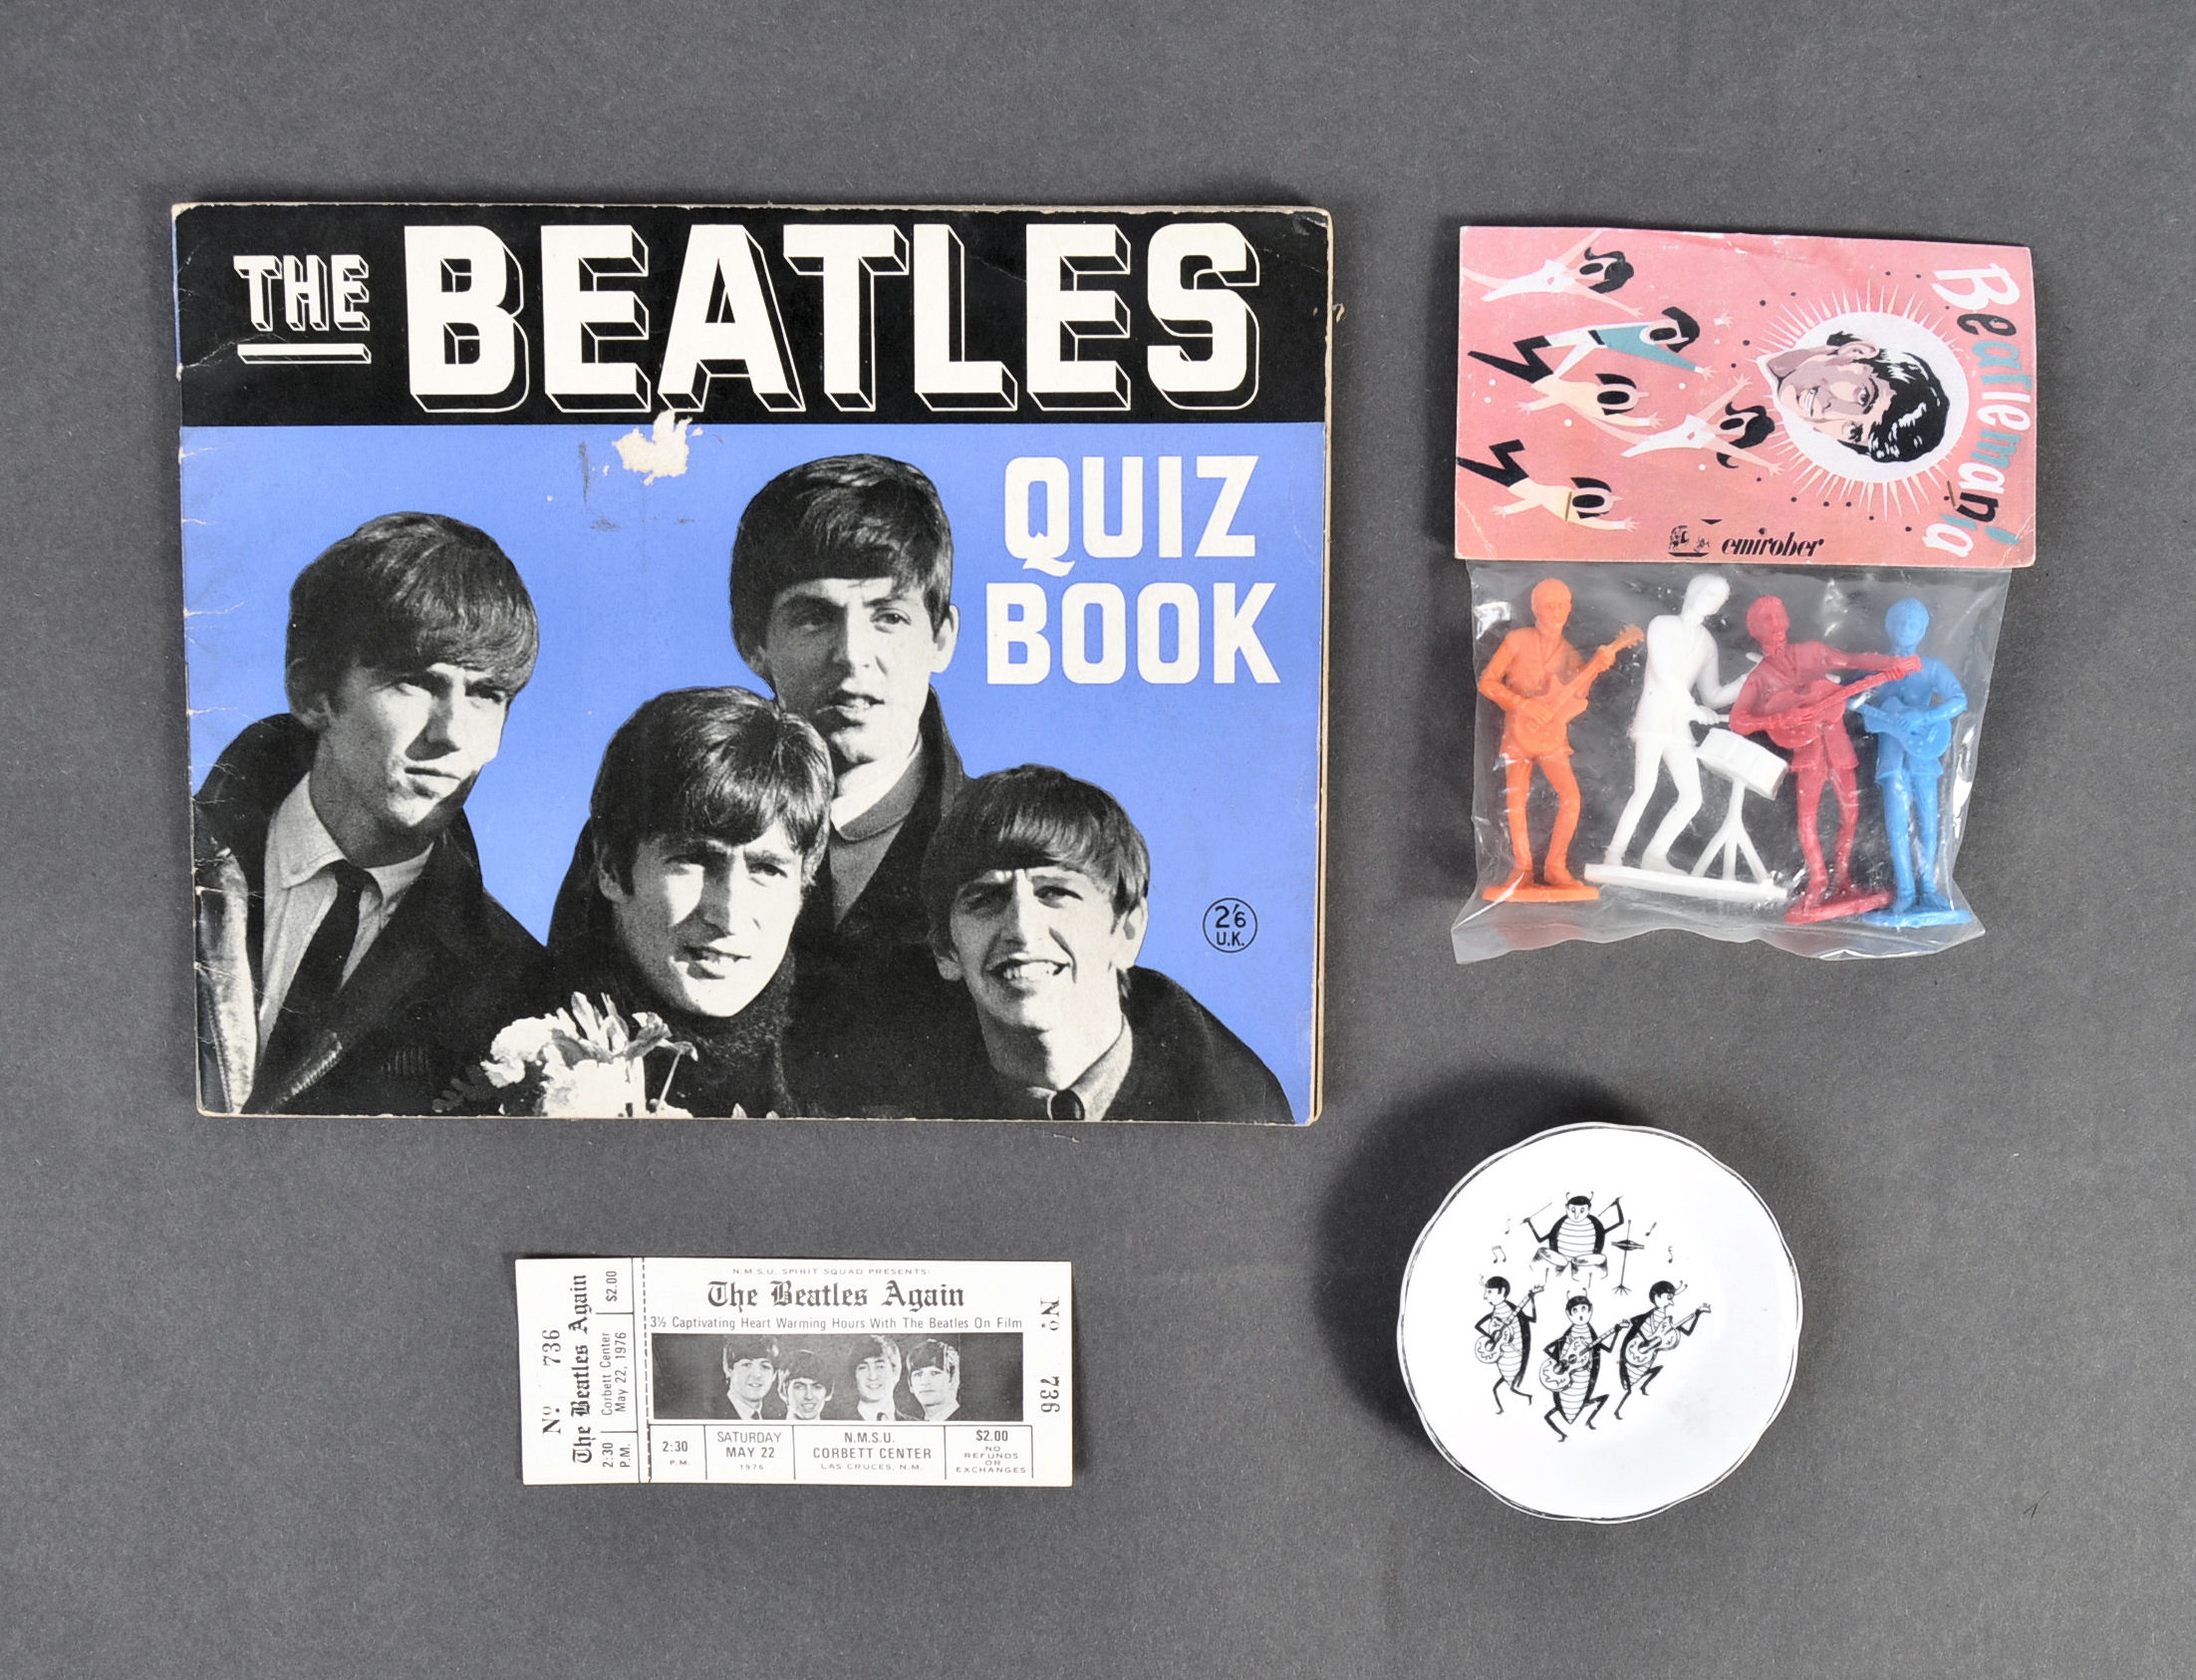 THE BEATLES - COLLECTION OF RARE VINTAGE ITEMS